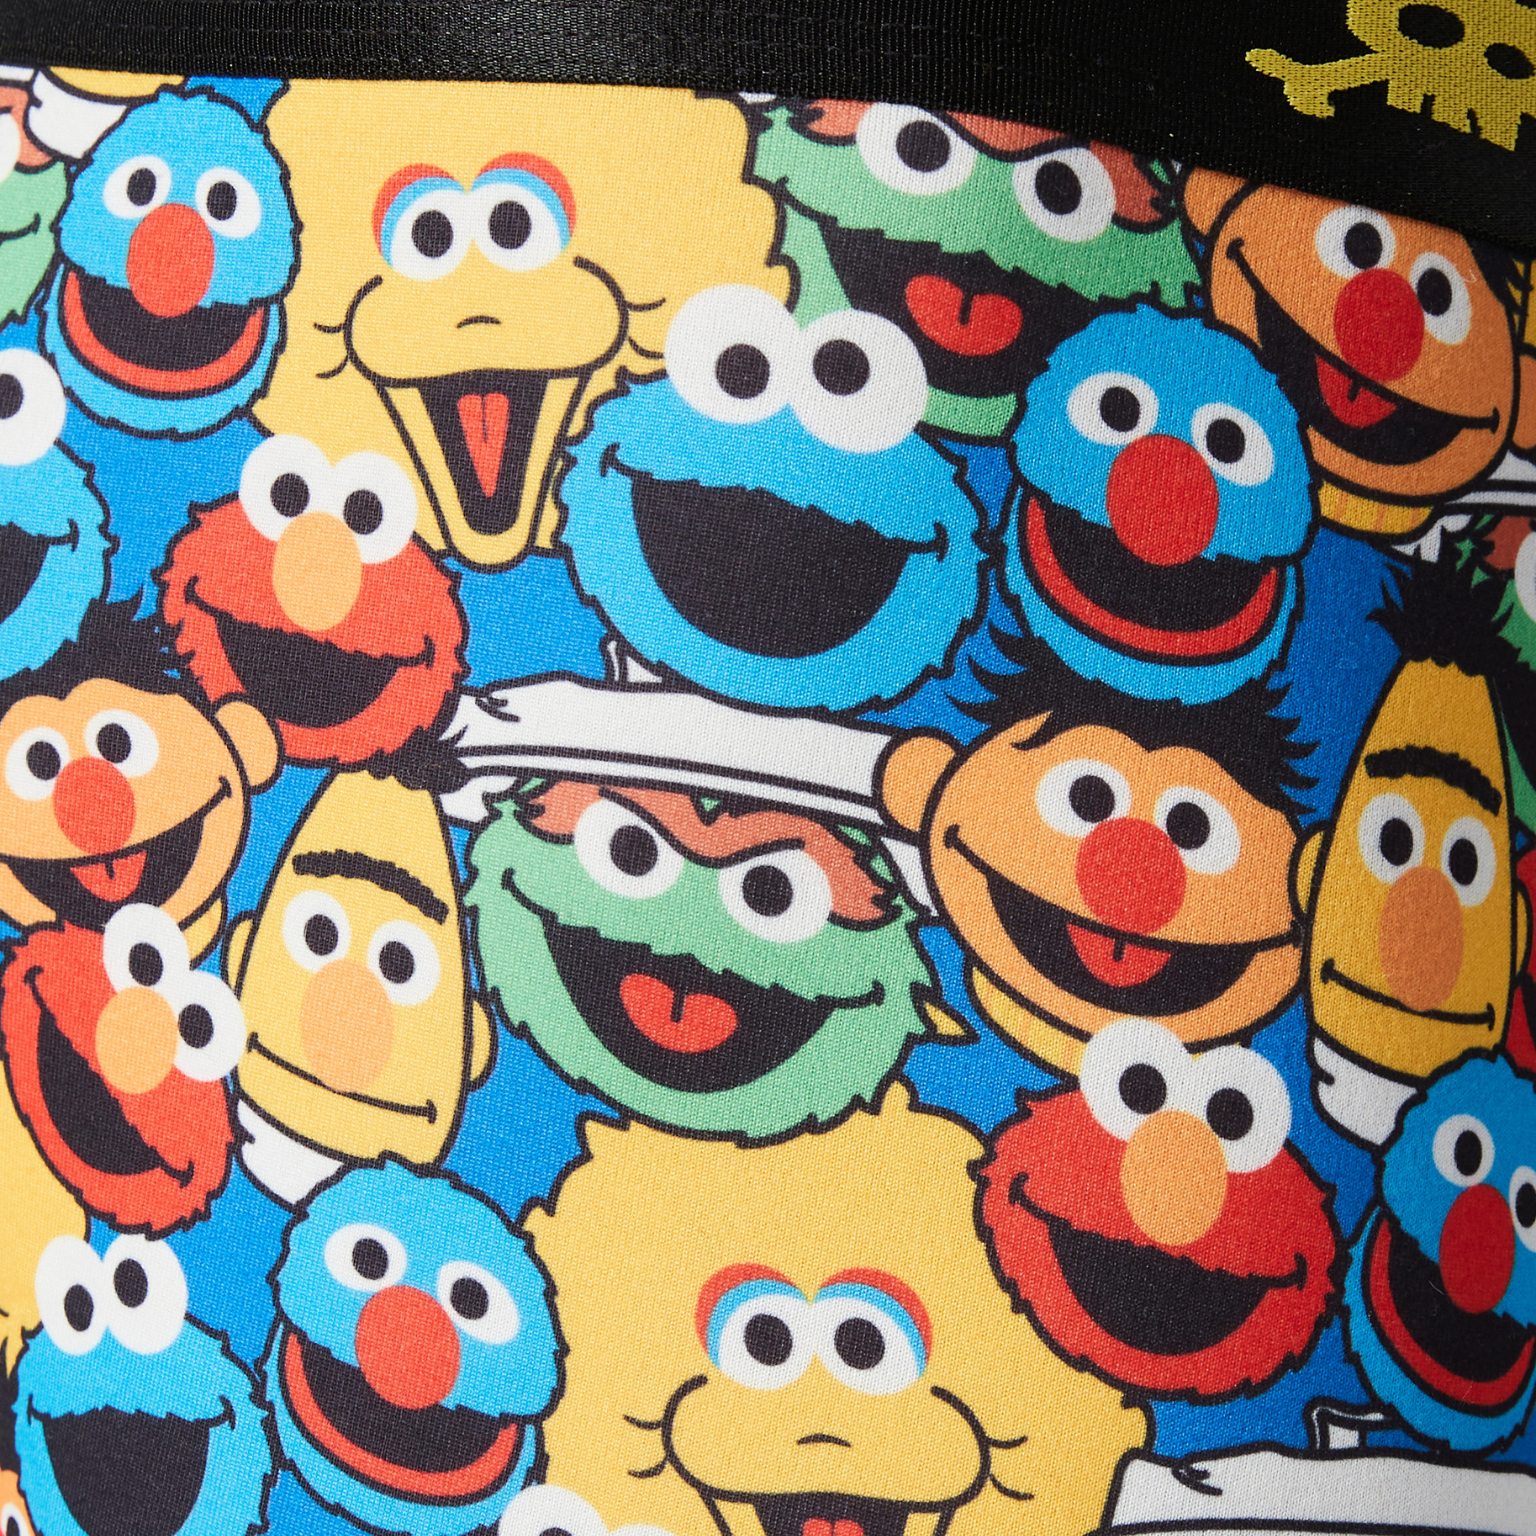 SWAG SESAME STREET BOXERS - ALL CHARACTERS